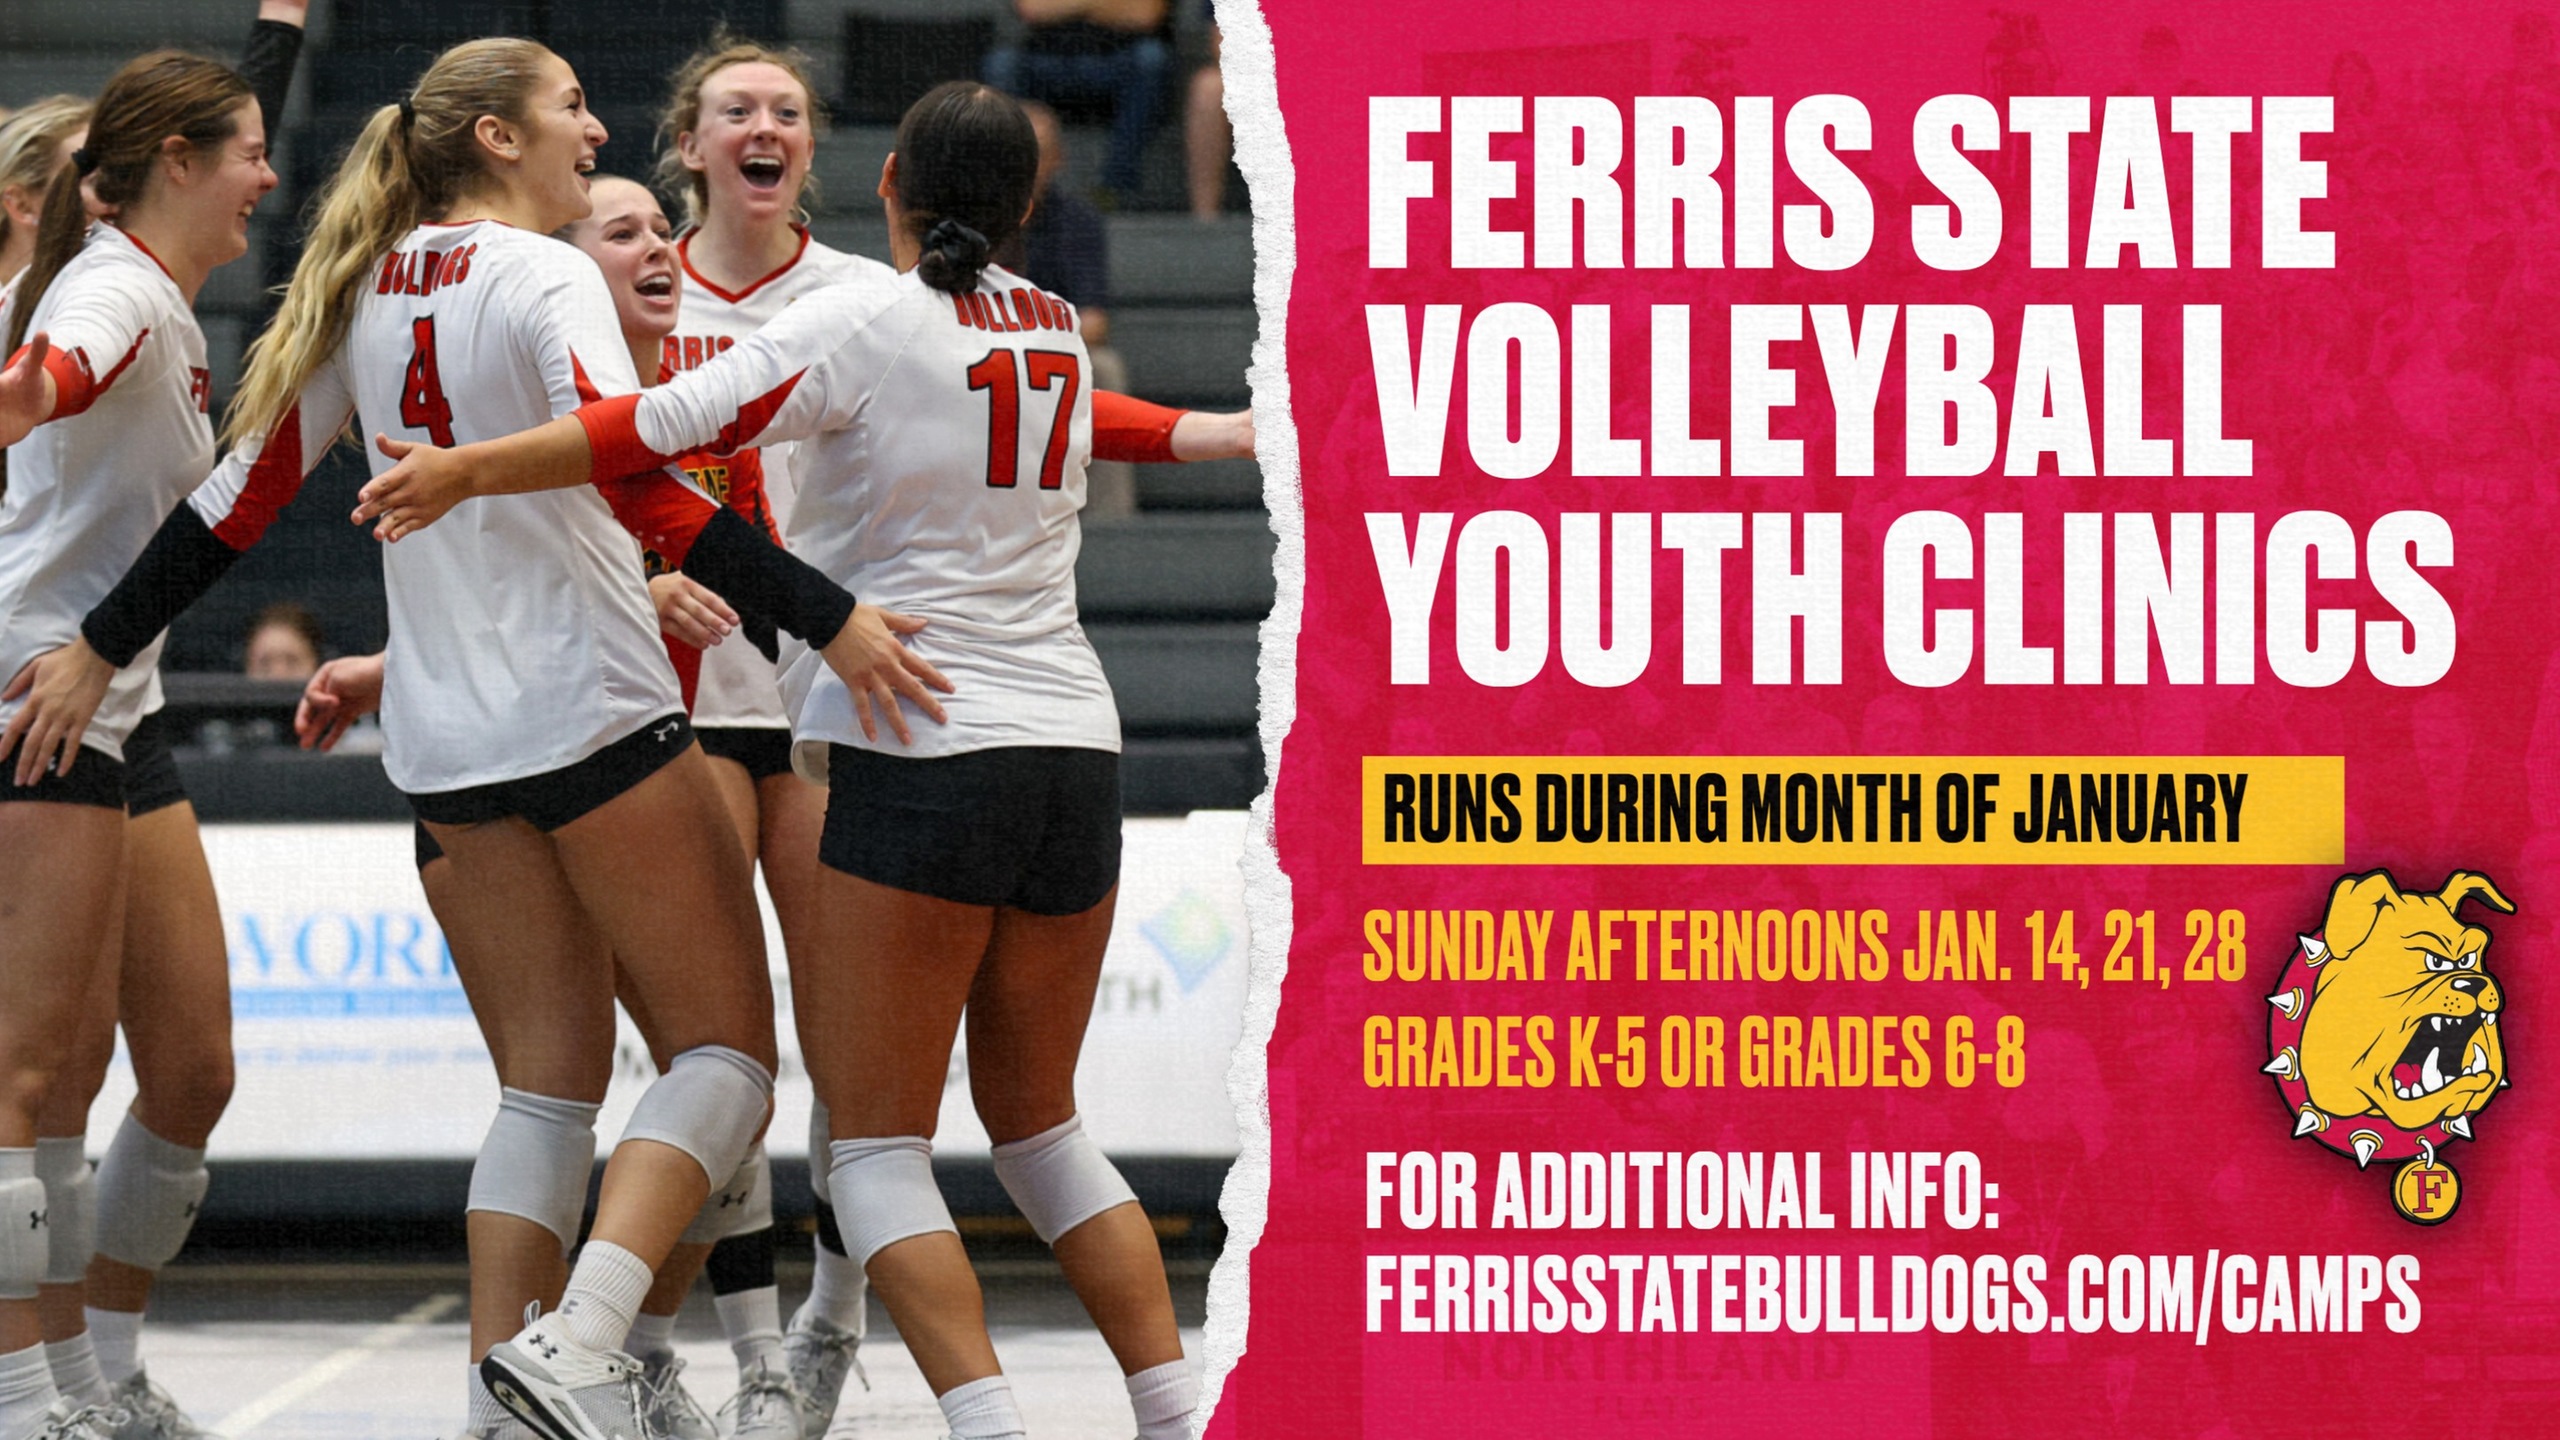 Ferris State Volleyball To Hold Youth Training Clinics This Month; Sign Up Now!